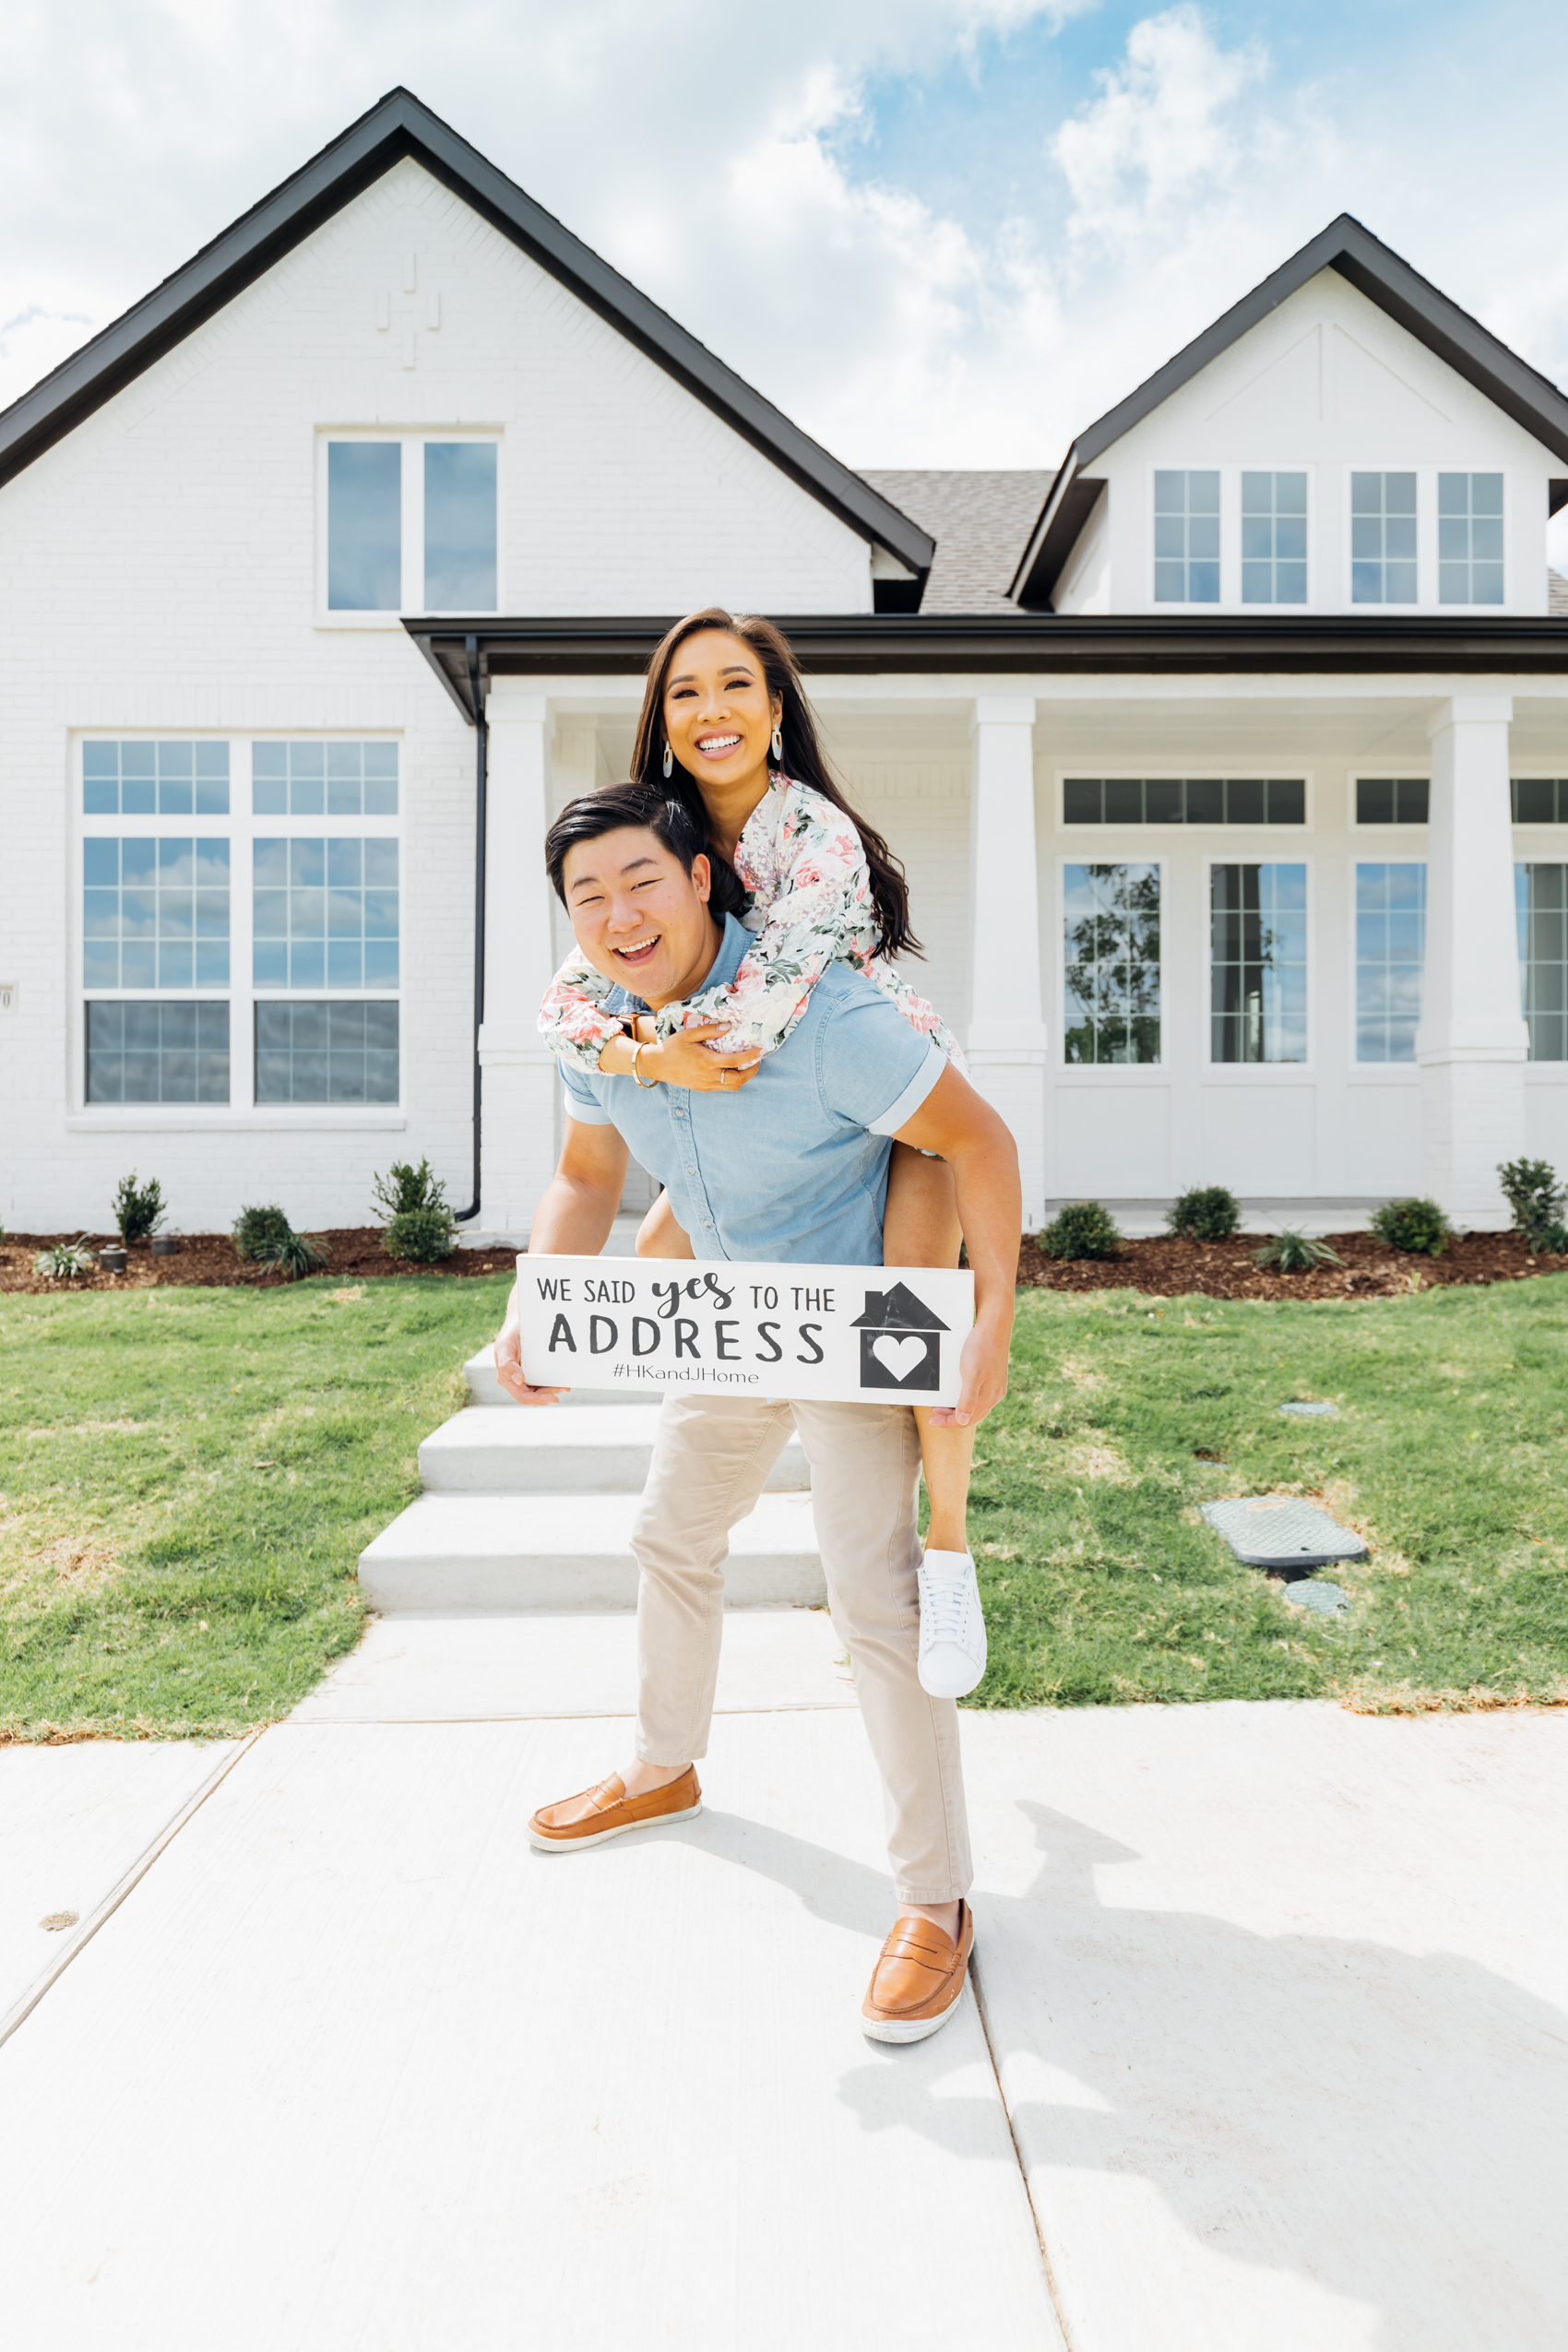 Hoang-Kim and Jonathan are first time homeowners who built their white painted brick one-story home in Dallas